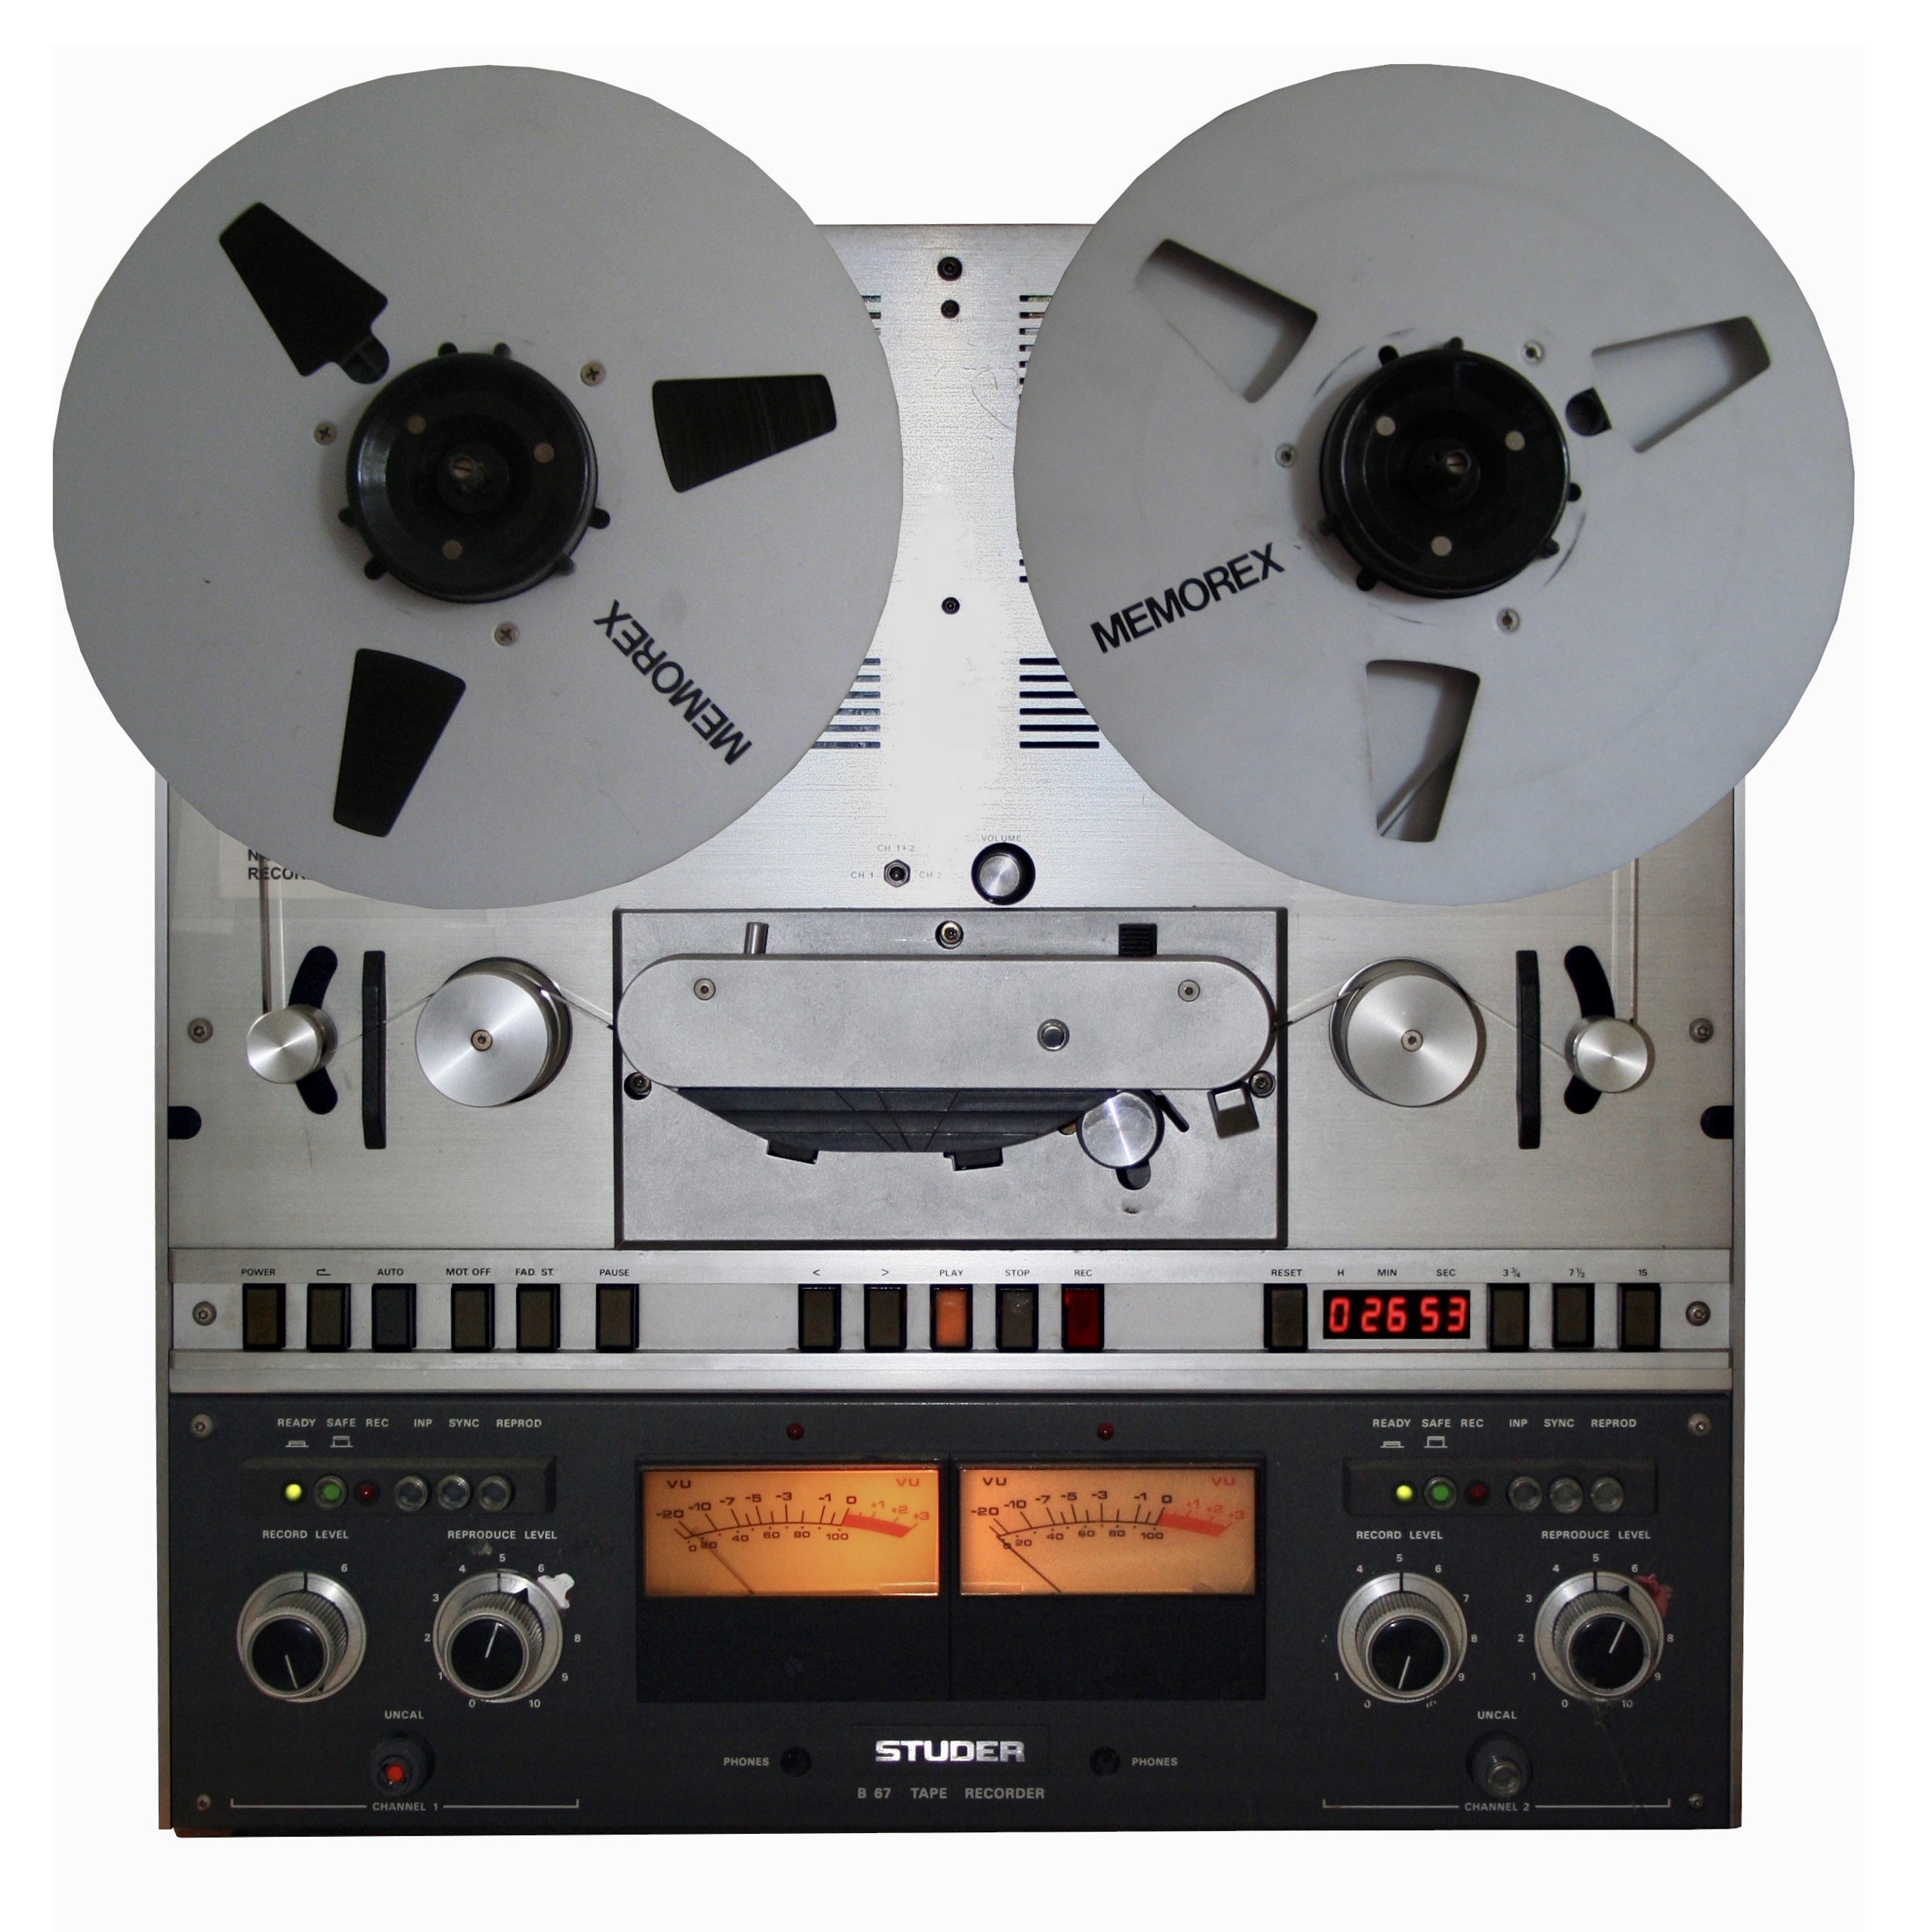 File:Studer B67 reel-to-reel audio tape recorder, ca. 1978 (cropped and  edited, larger 10 inch tapes).jpg - Wikimedia Commons